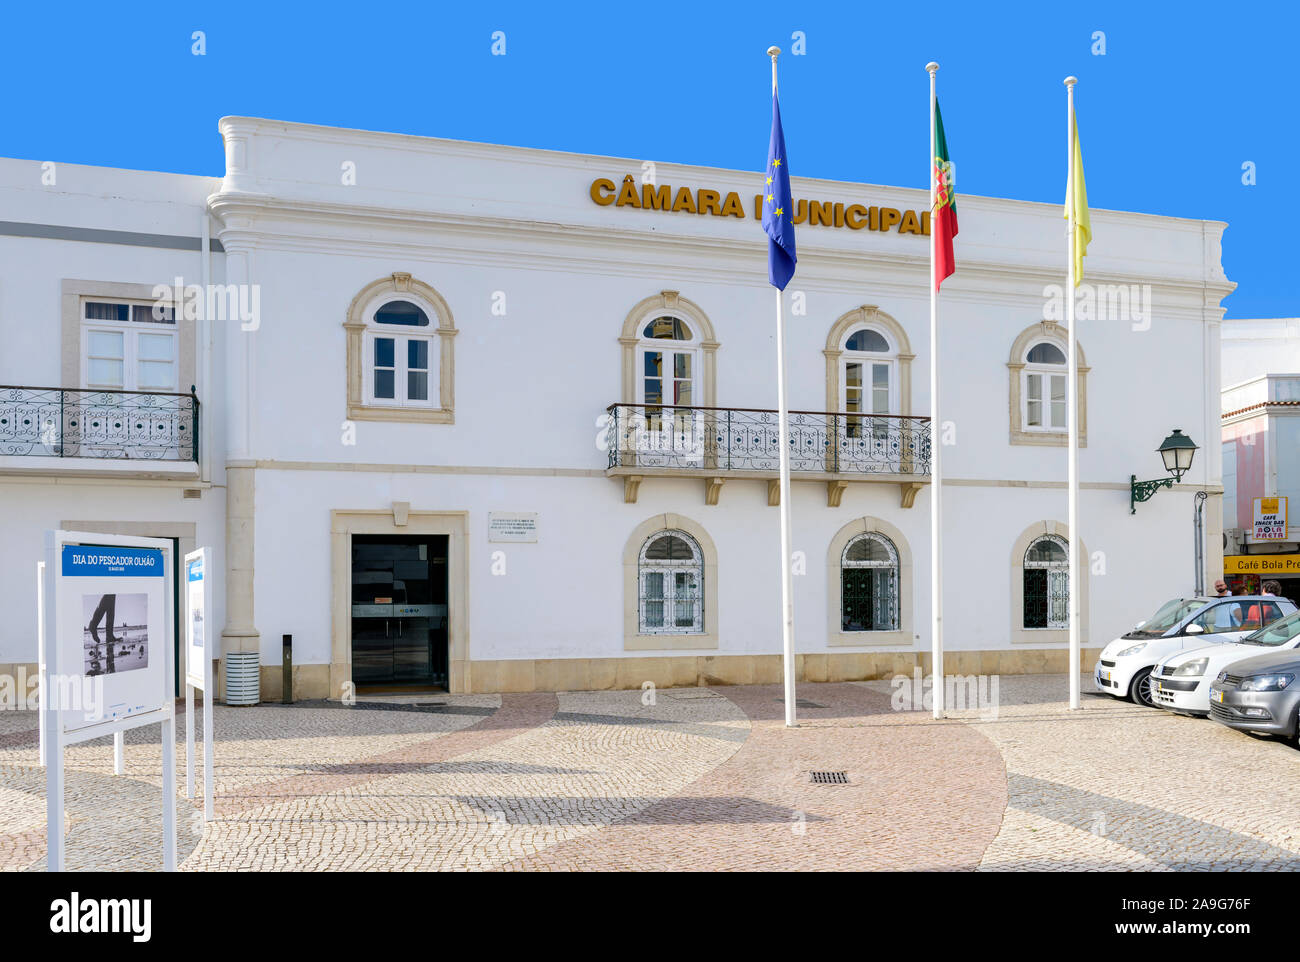 The Olhao town hall camera municipal council office building Olhao, East Algarve, Portugal. Stock Photo